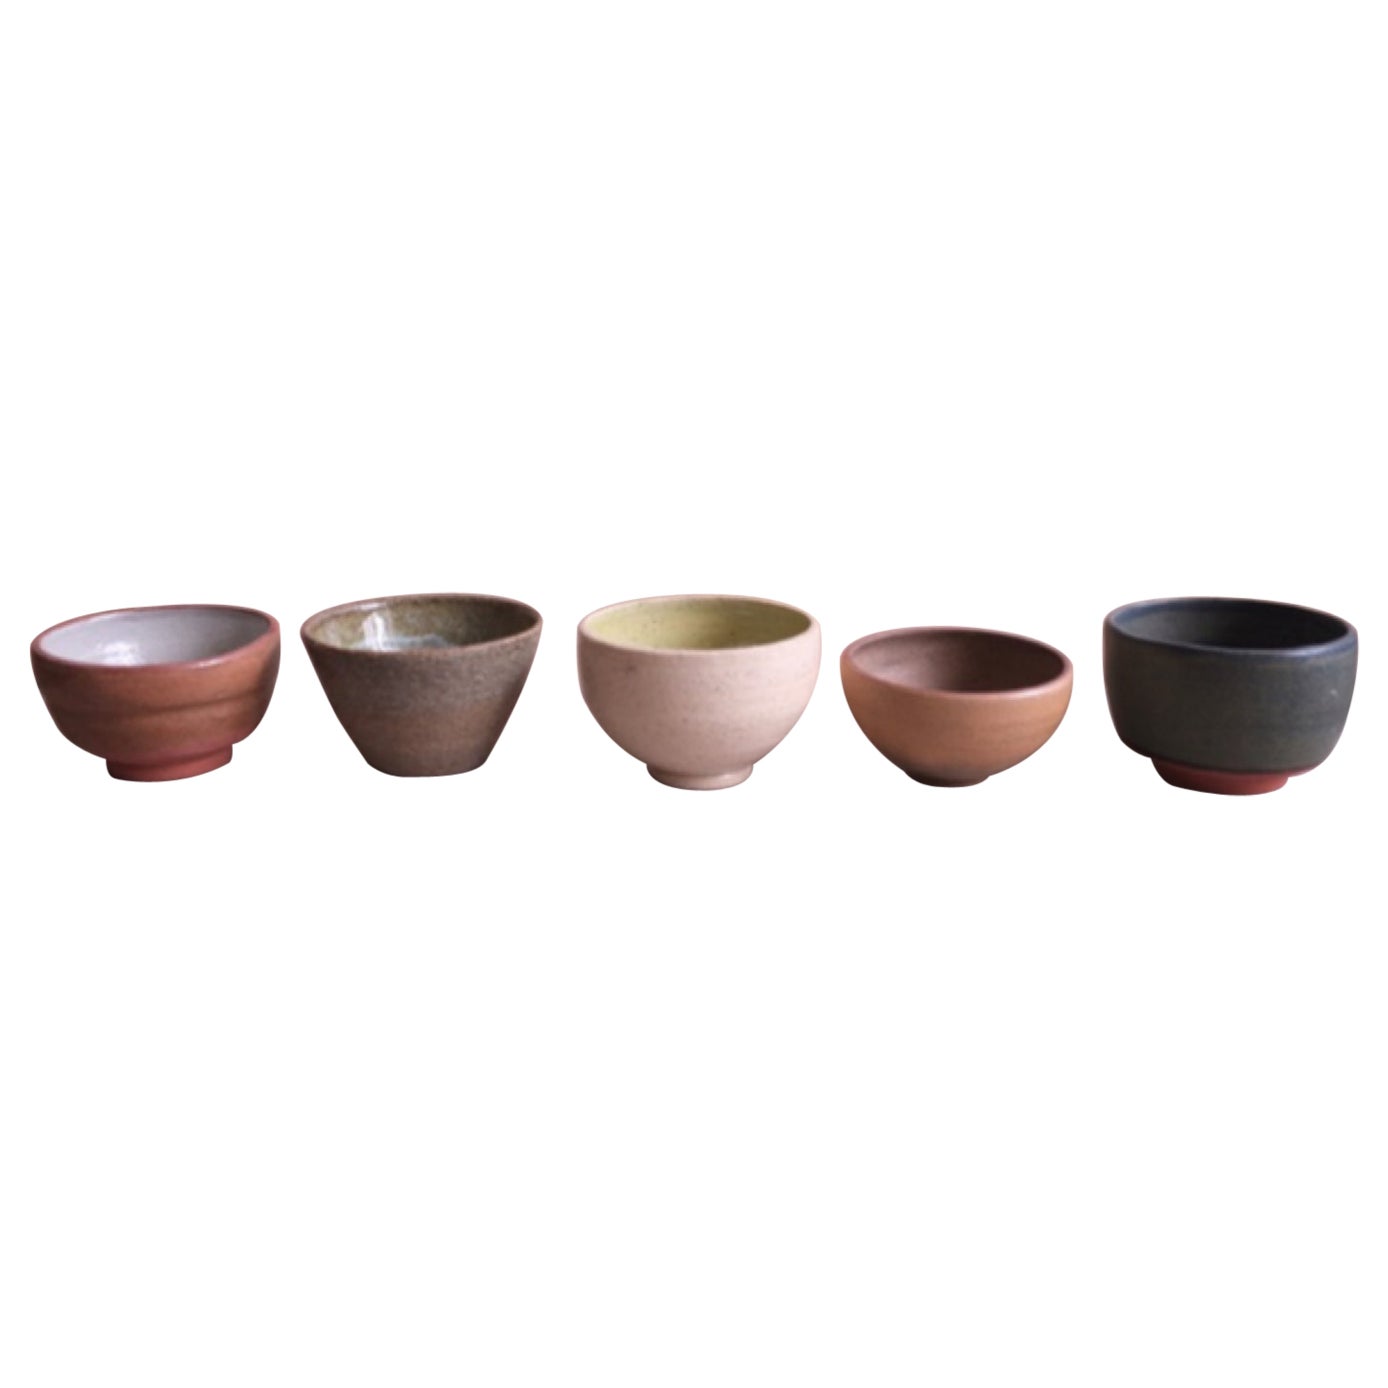 Selection of 5 Tea Cups